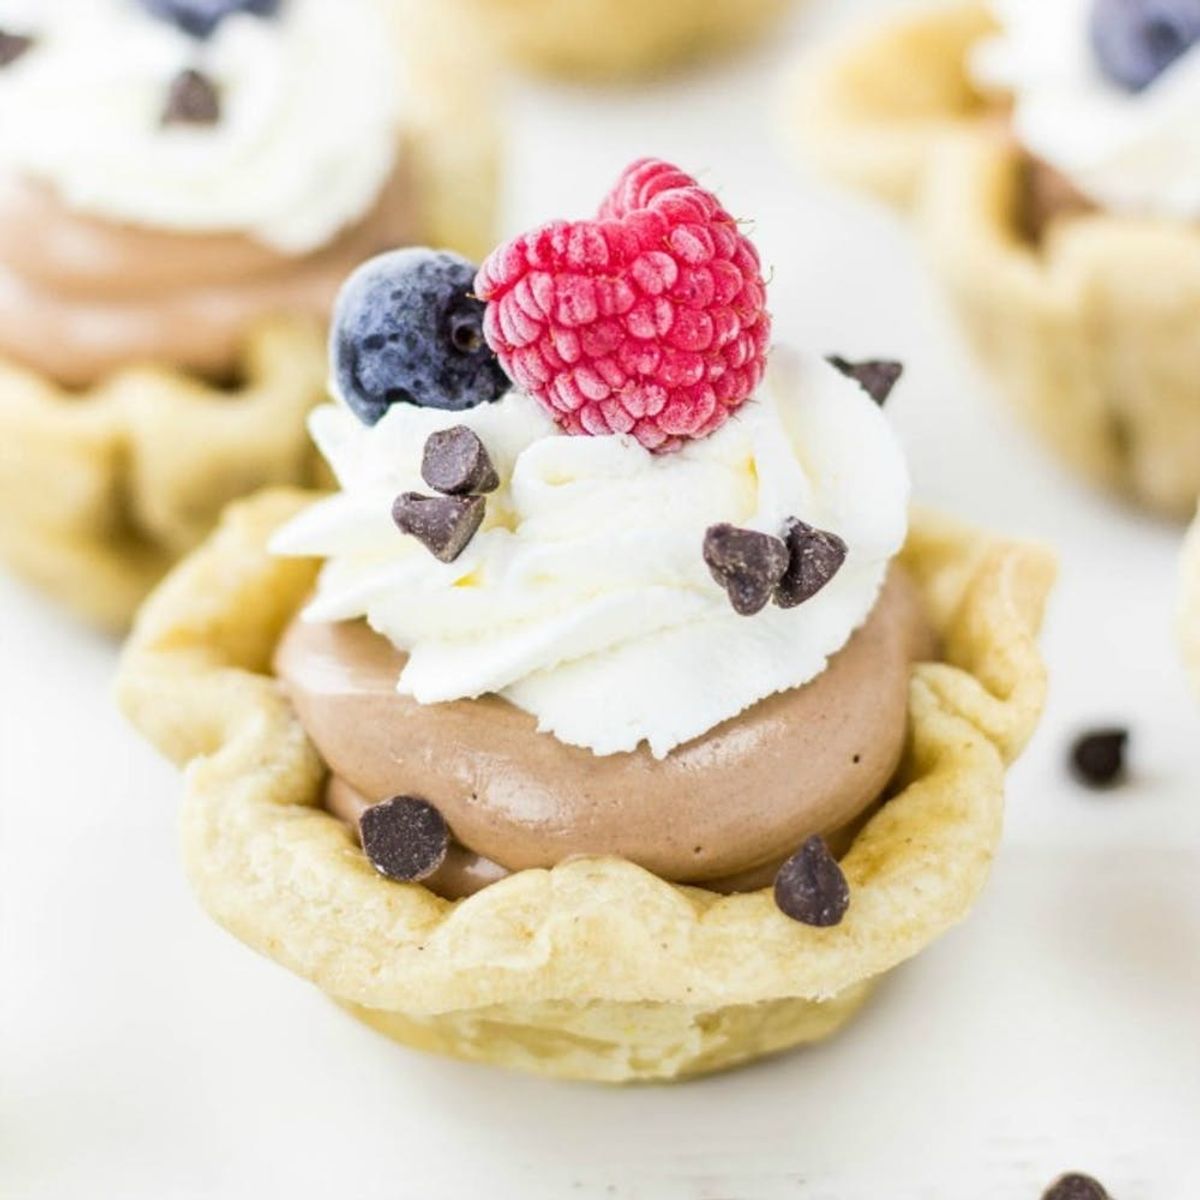 15 Easy Dessert Recipes That Are Perfect for Any Novice Baker